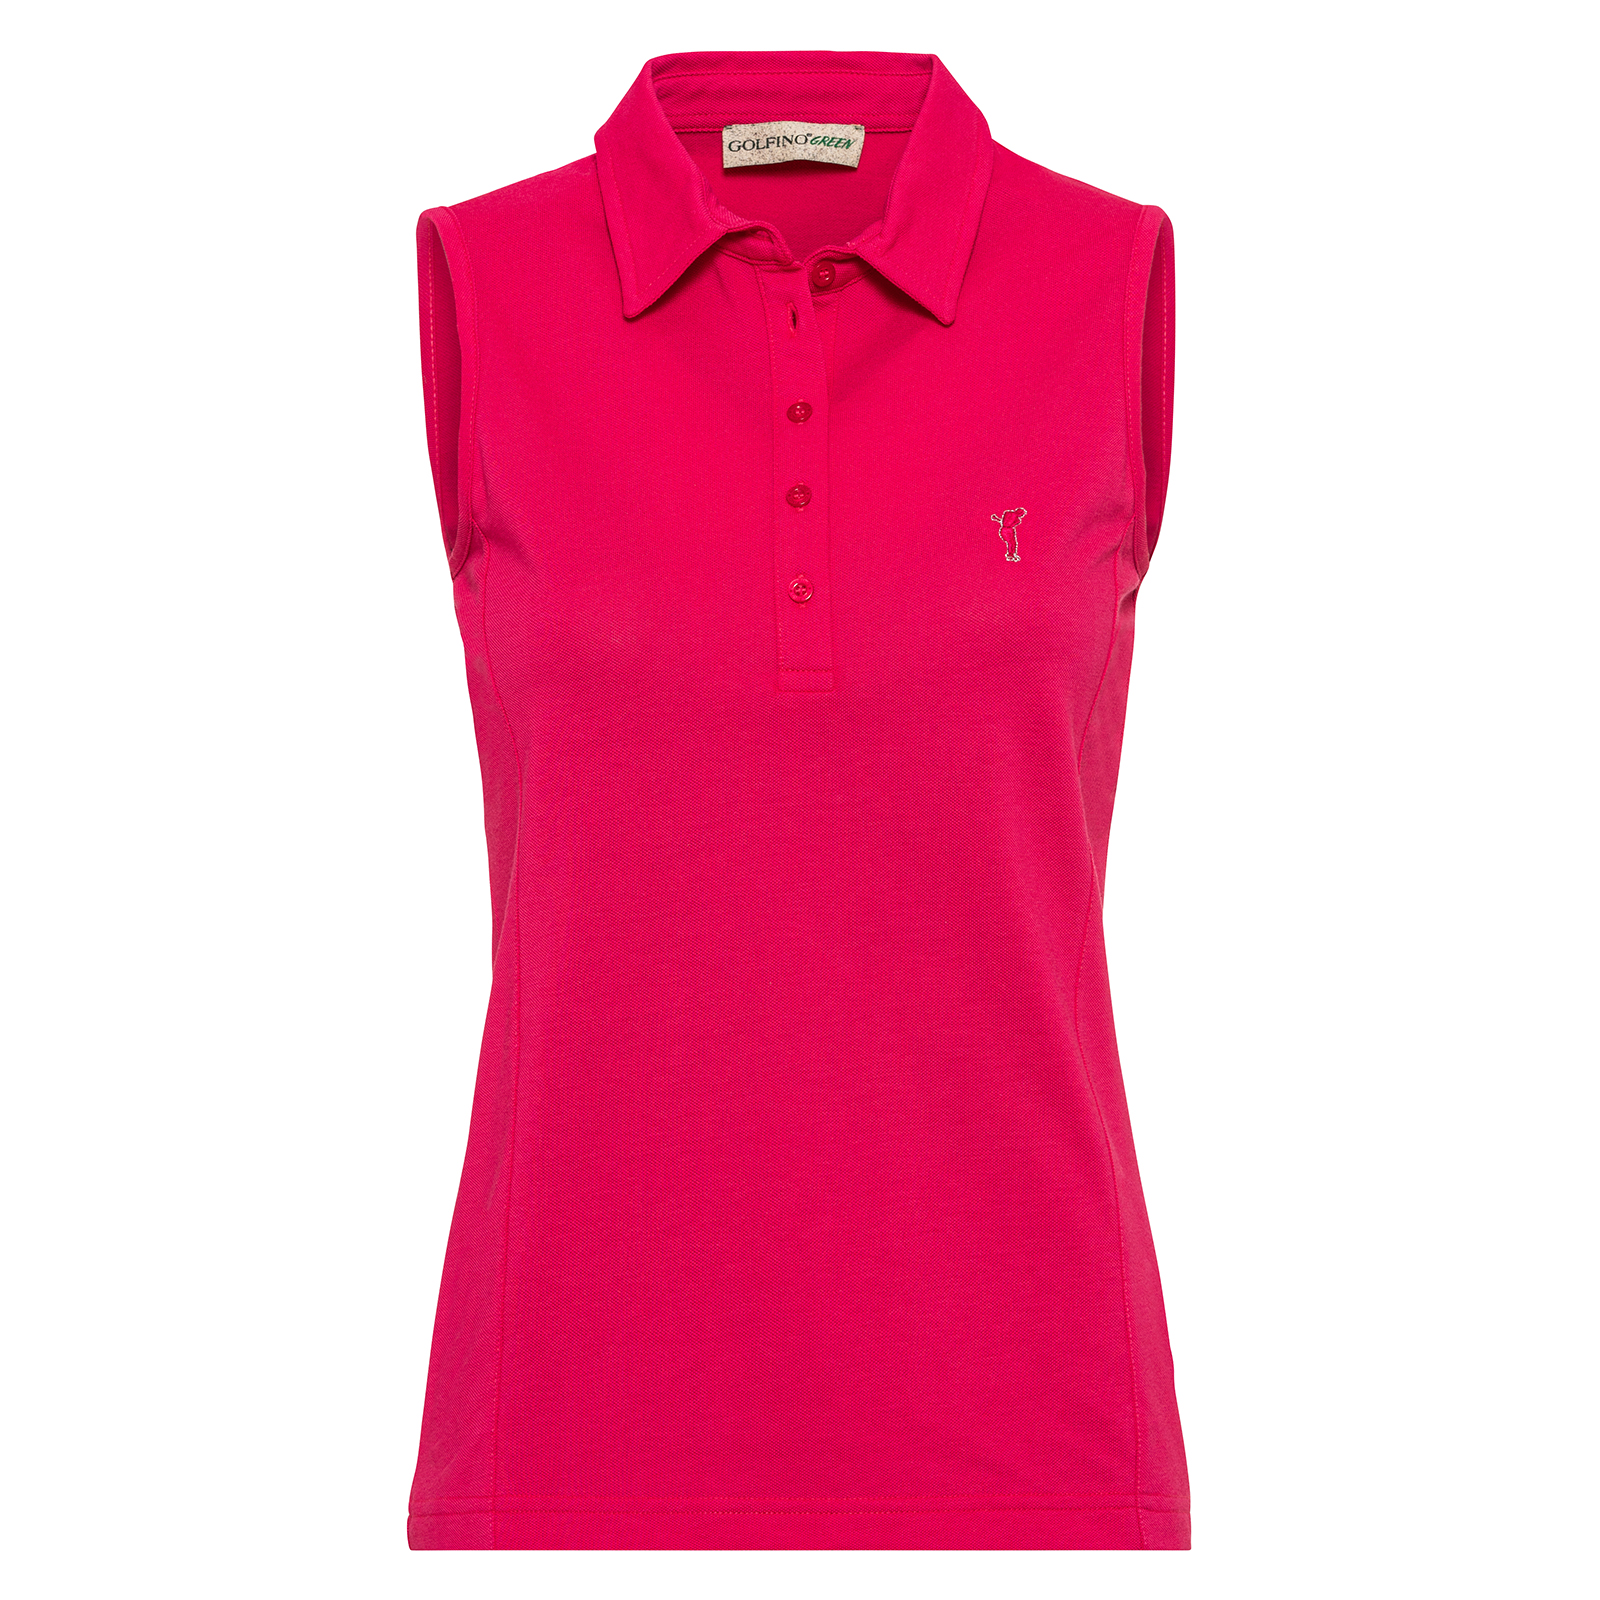 Ladies' golf top made from sustainably produced fabric 